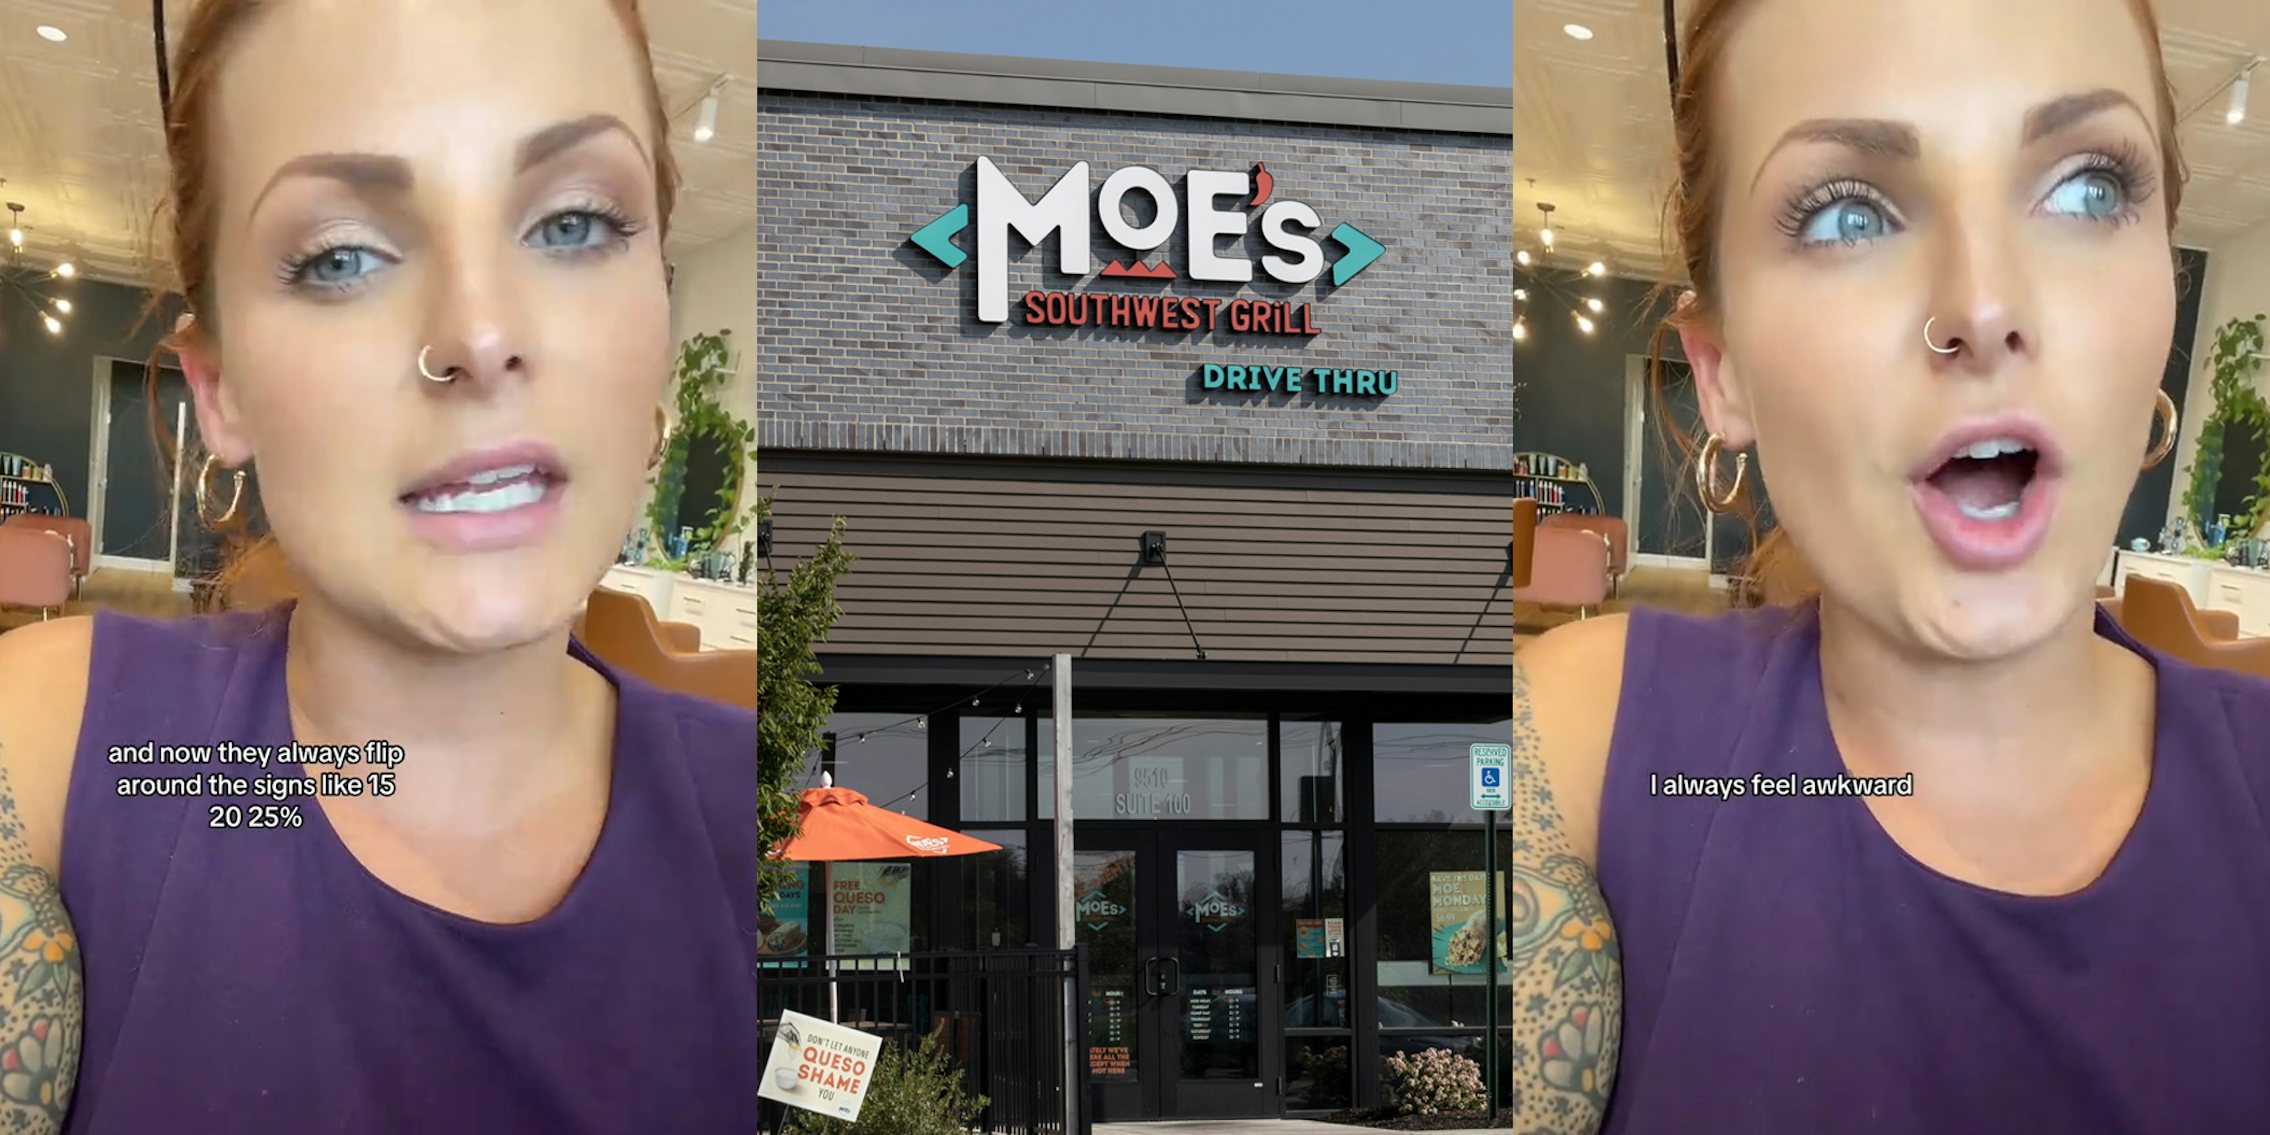 Moe's customer speaking with caption 'and now they always flip around the signs like 20 25%' (l) Moe's building with sign (c) Moe's customer speaking with caption 'I always feel awkward' (r)